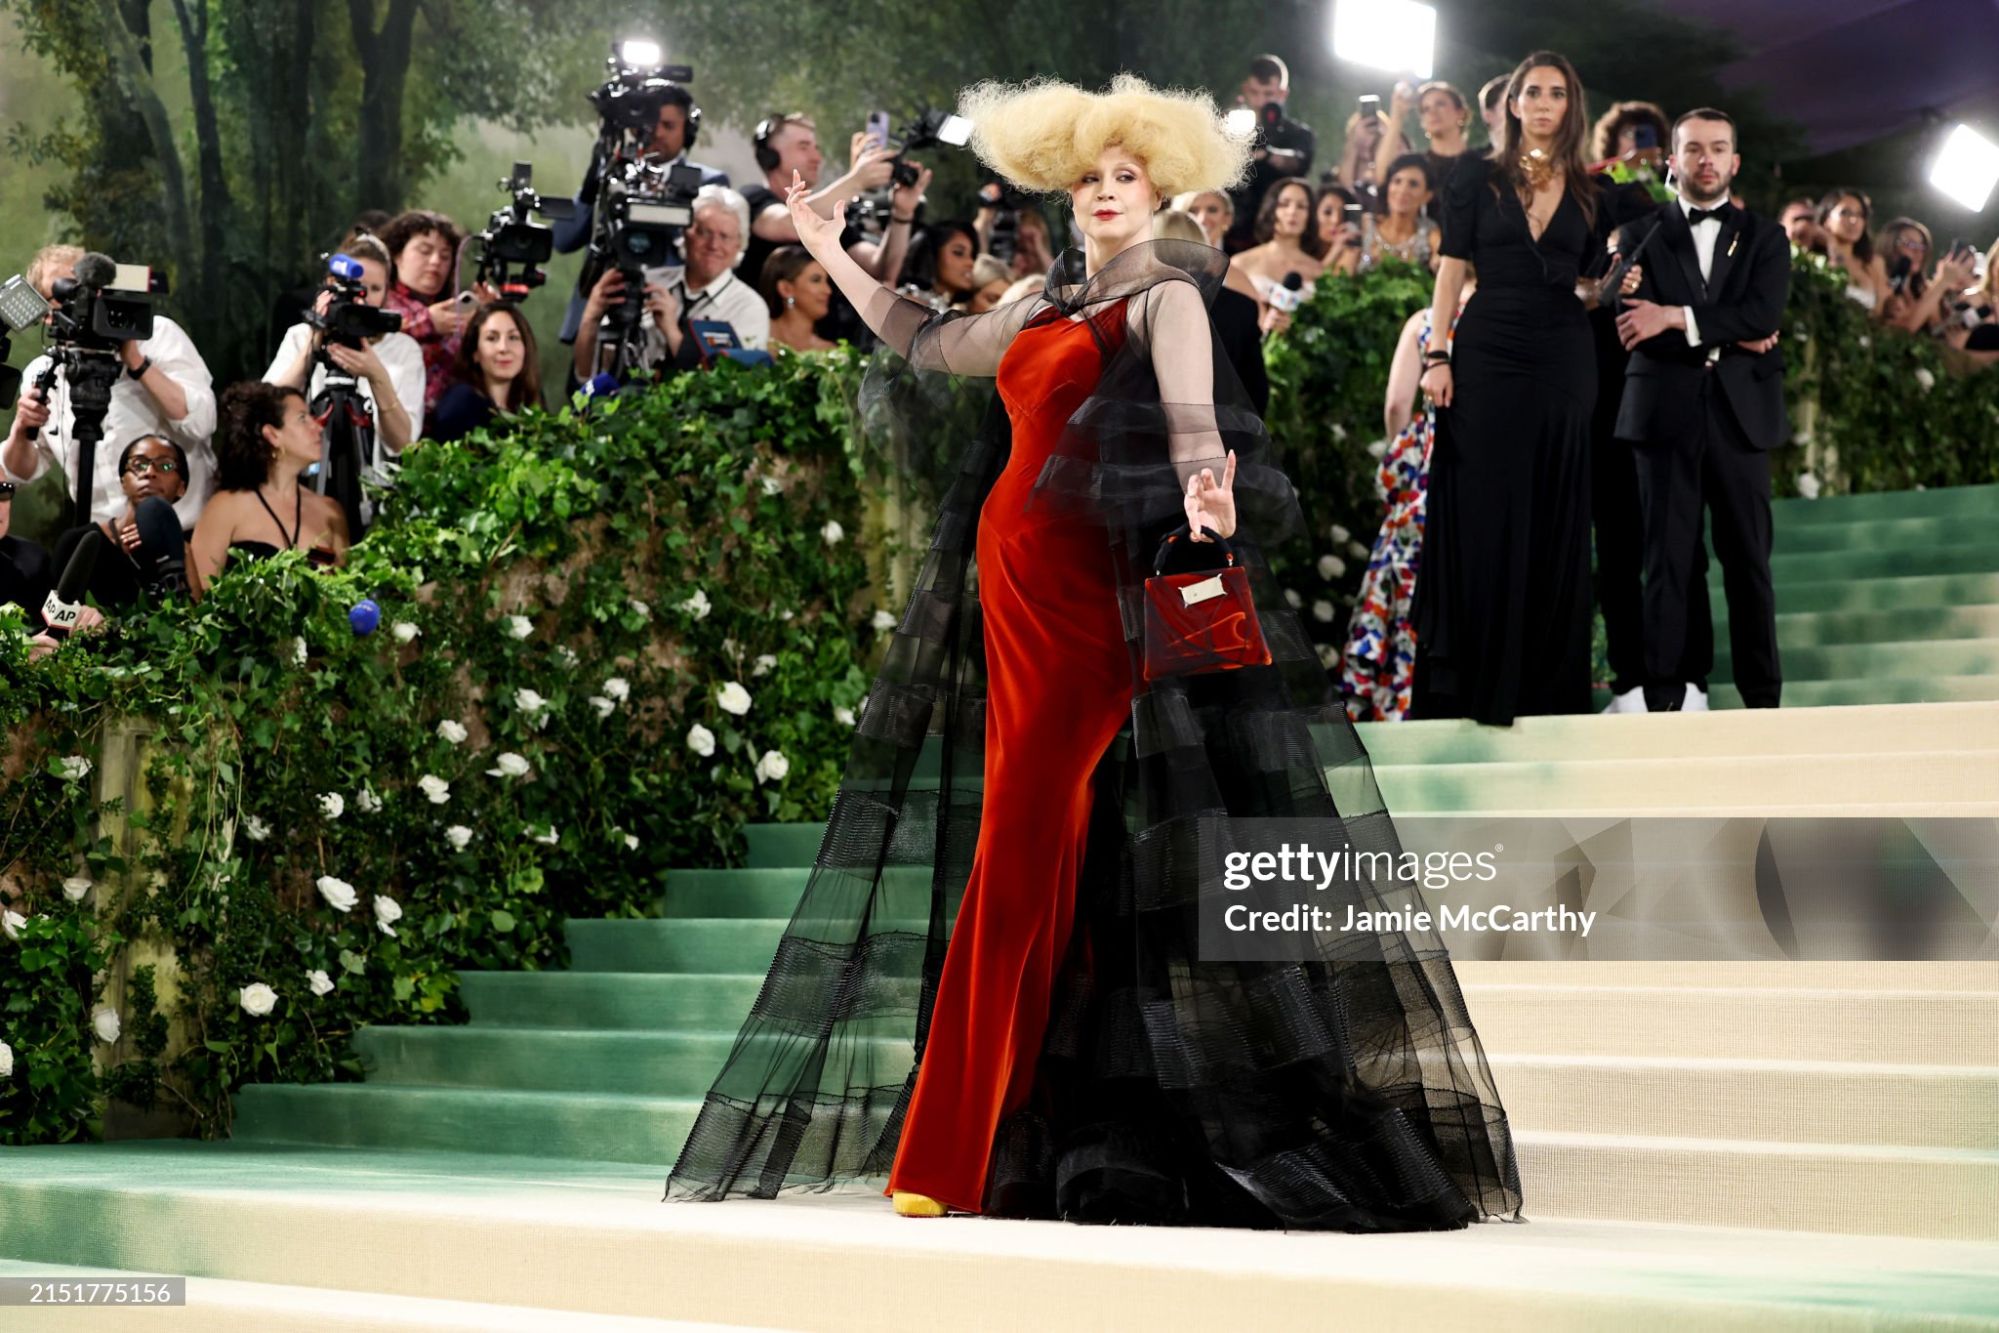 gettyimages-2151775156-2048x2048.jpg